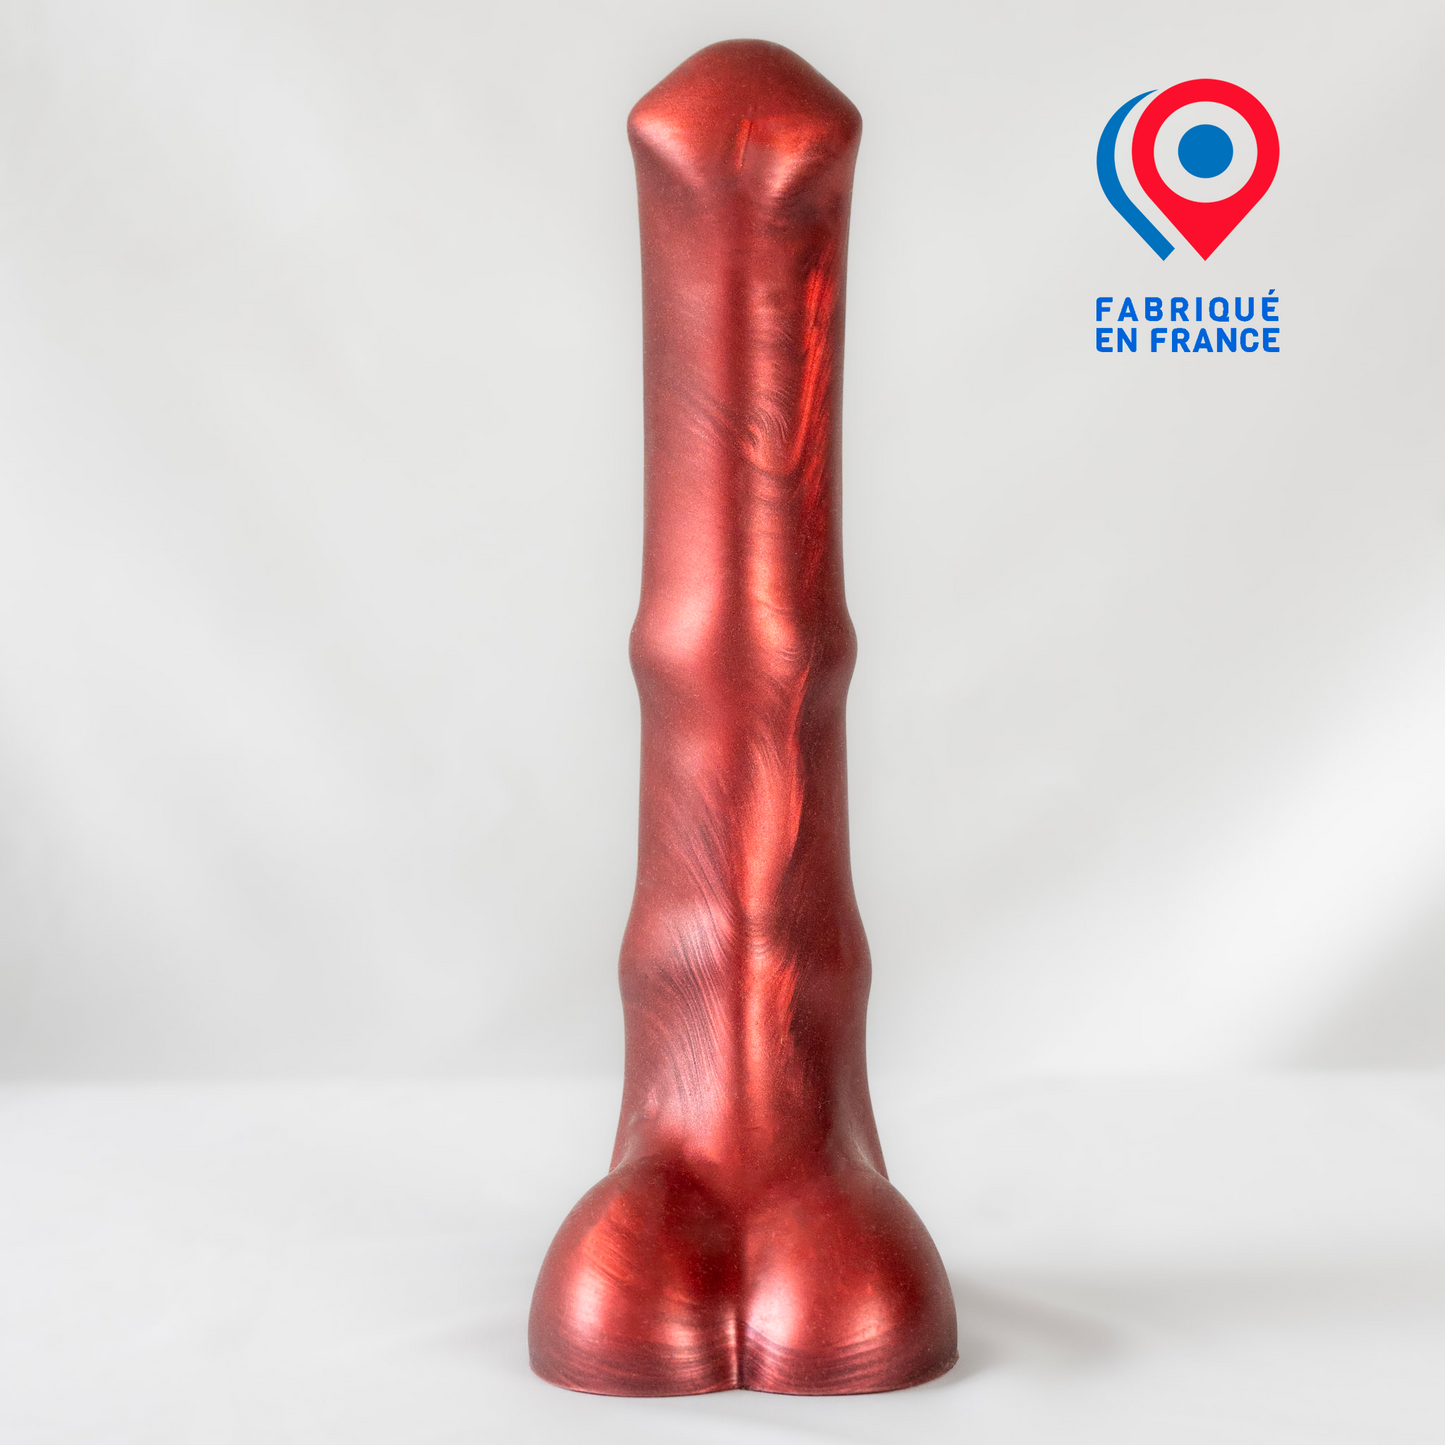 krapulle-sextoy-artisanal-made-france-inclusif-60-22-stewball-photos-rouge-4